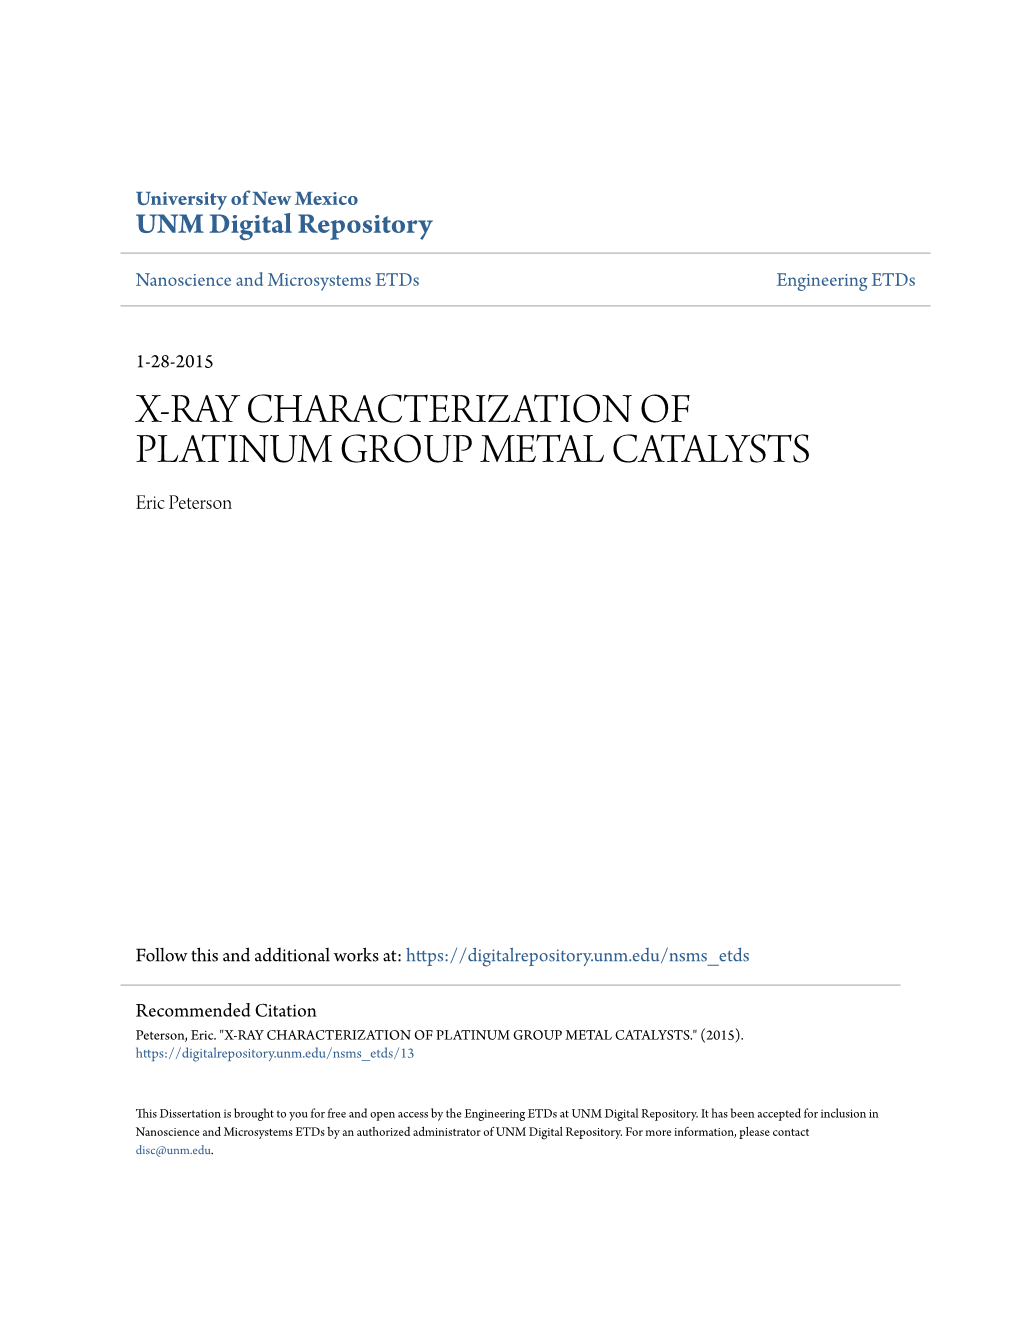 X-RAY CHARACTERIZATION of PLATINUM GROUP METAL CATALYSTS Eric Peterson